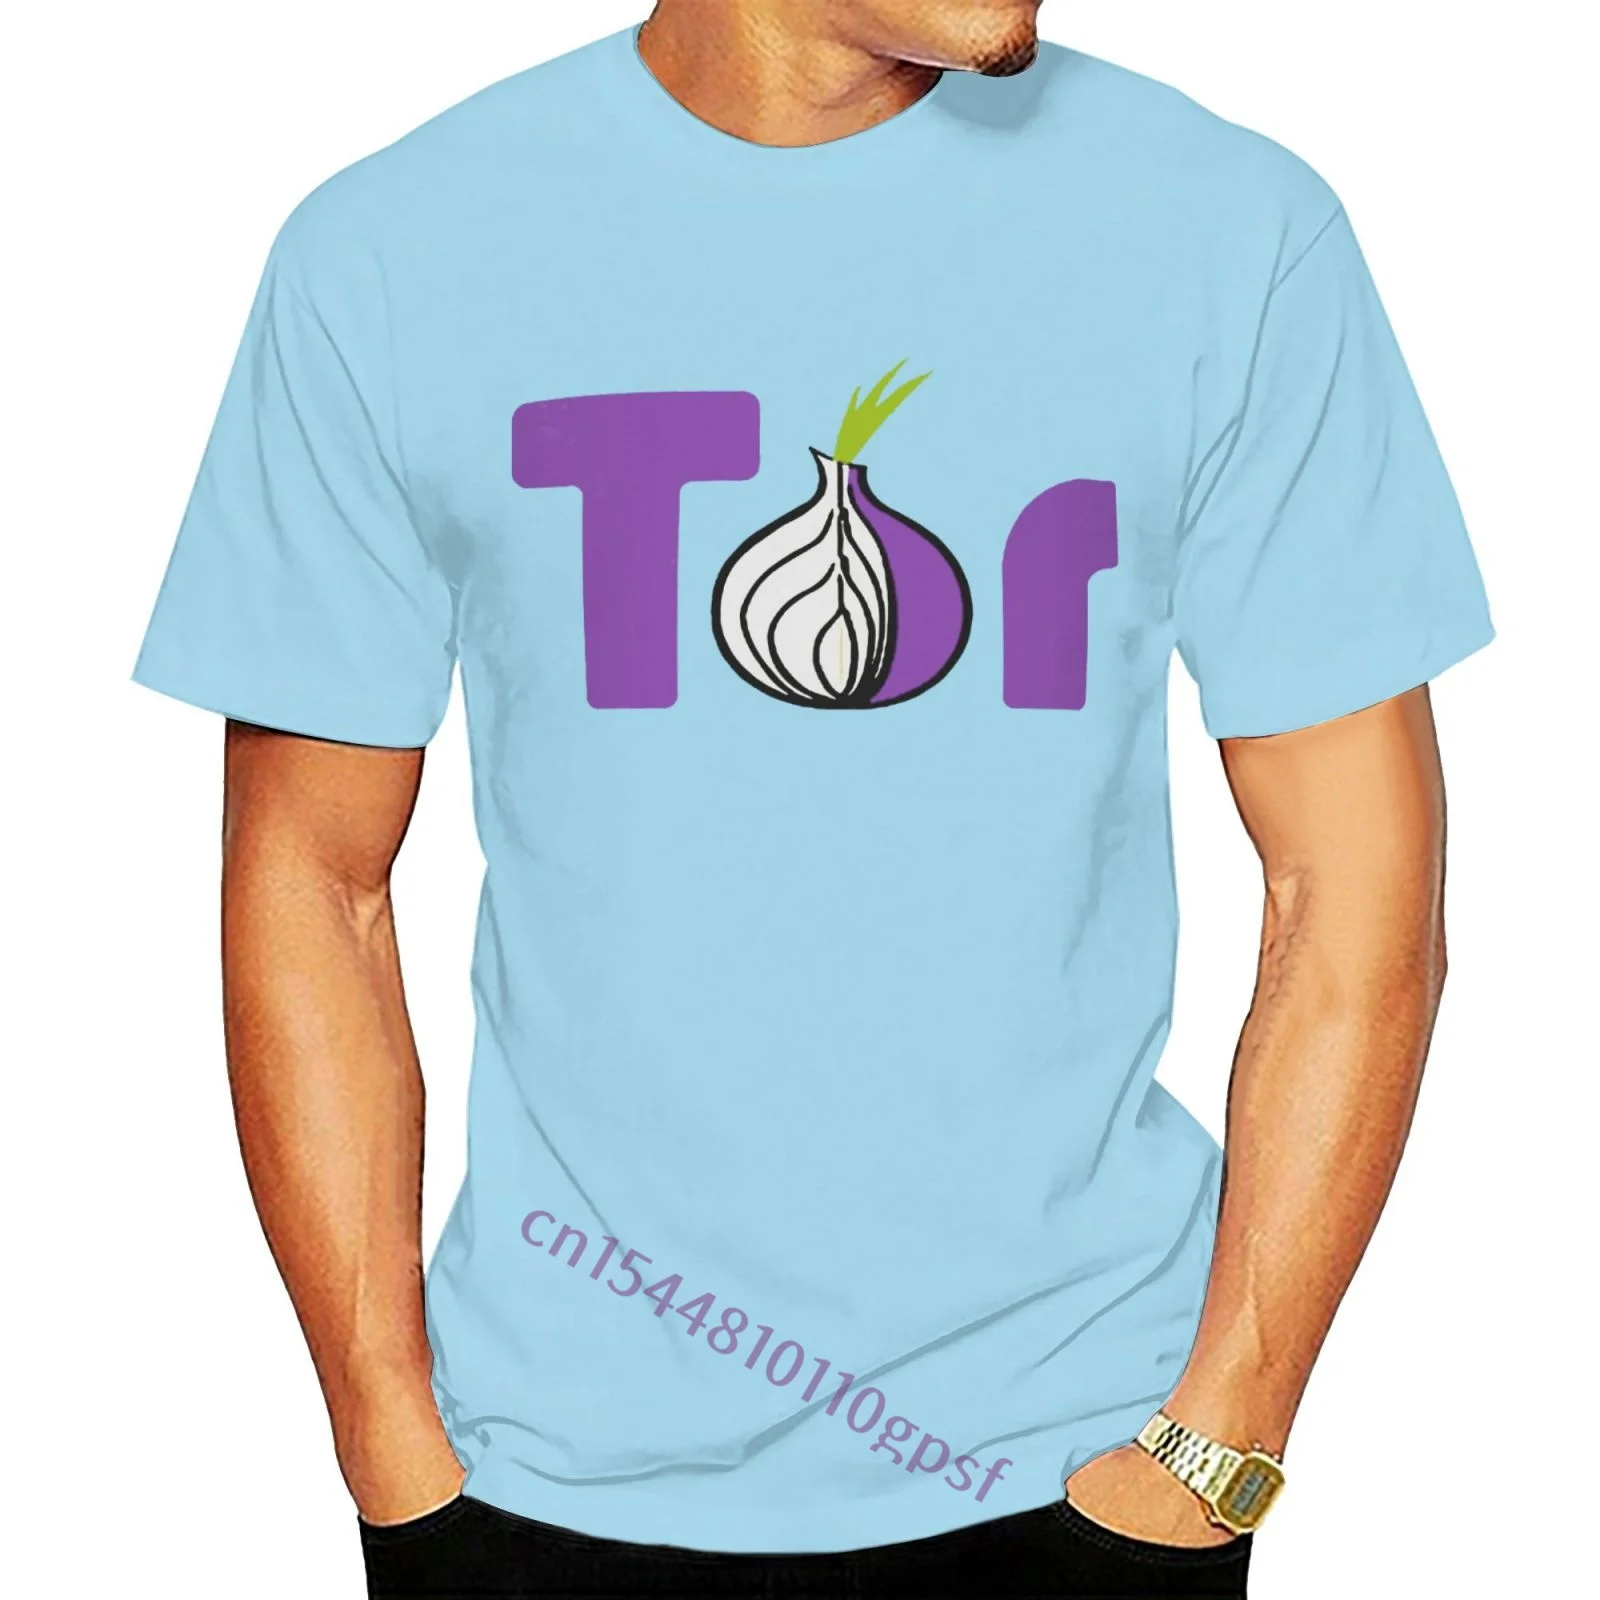 

Unisex Adult T Shirt S-Xxl New TOR Anonymity Onion Router Anonymous Sky Blue Men's T-Shirt Size S-6XL